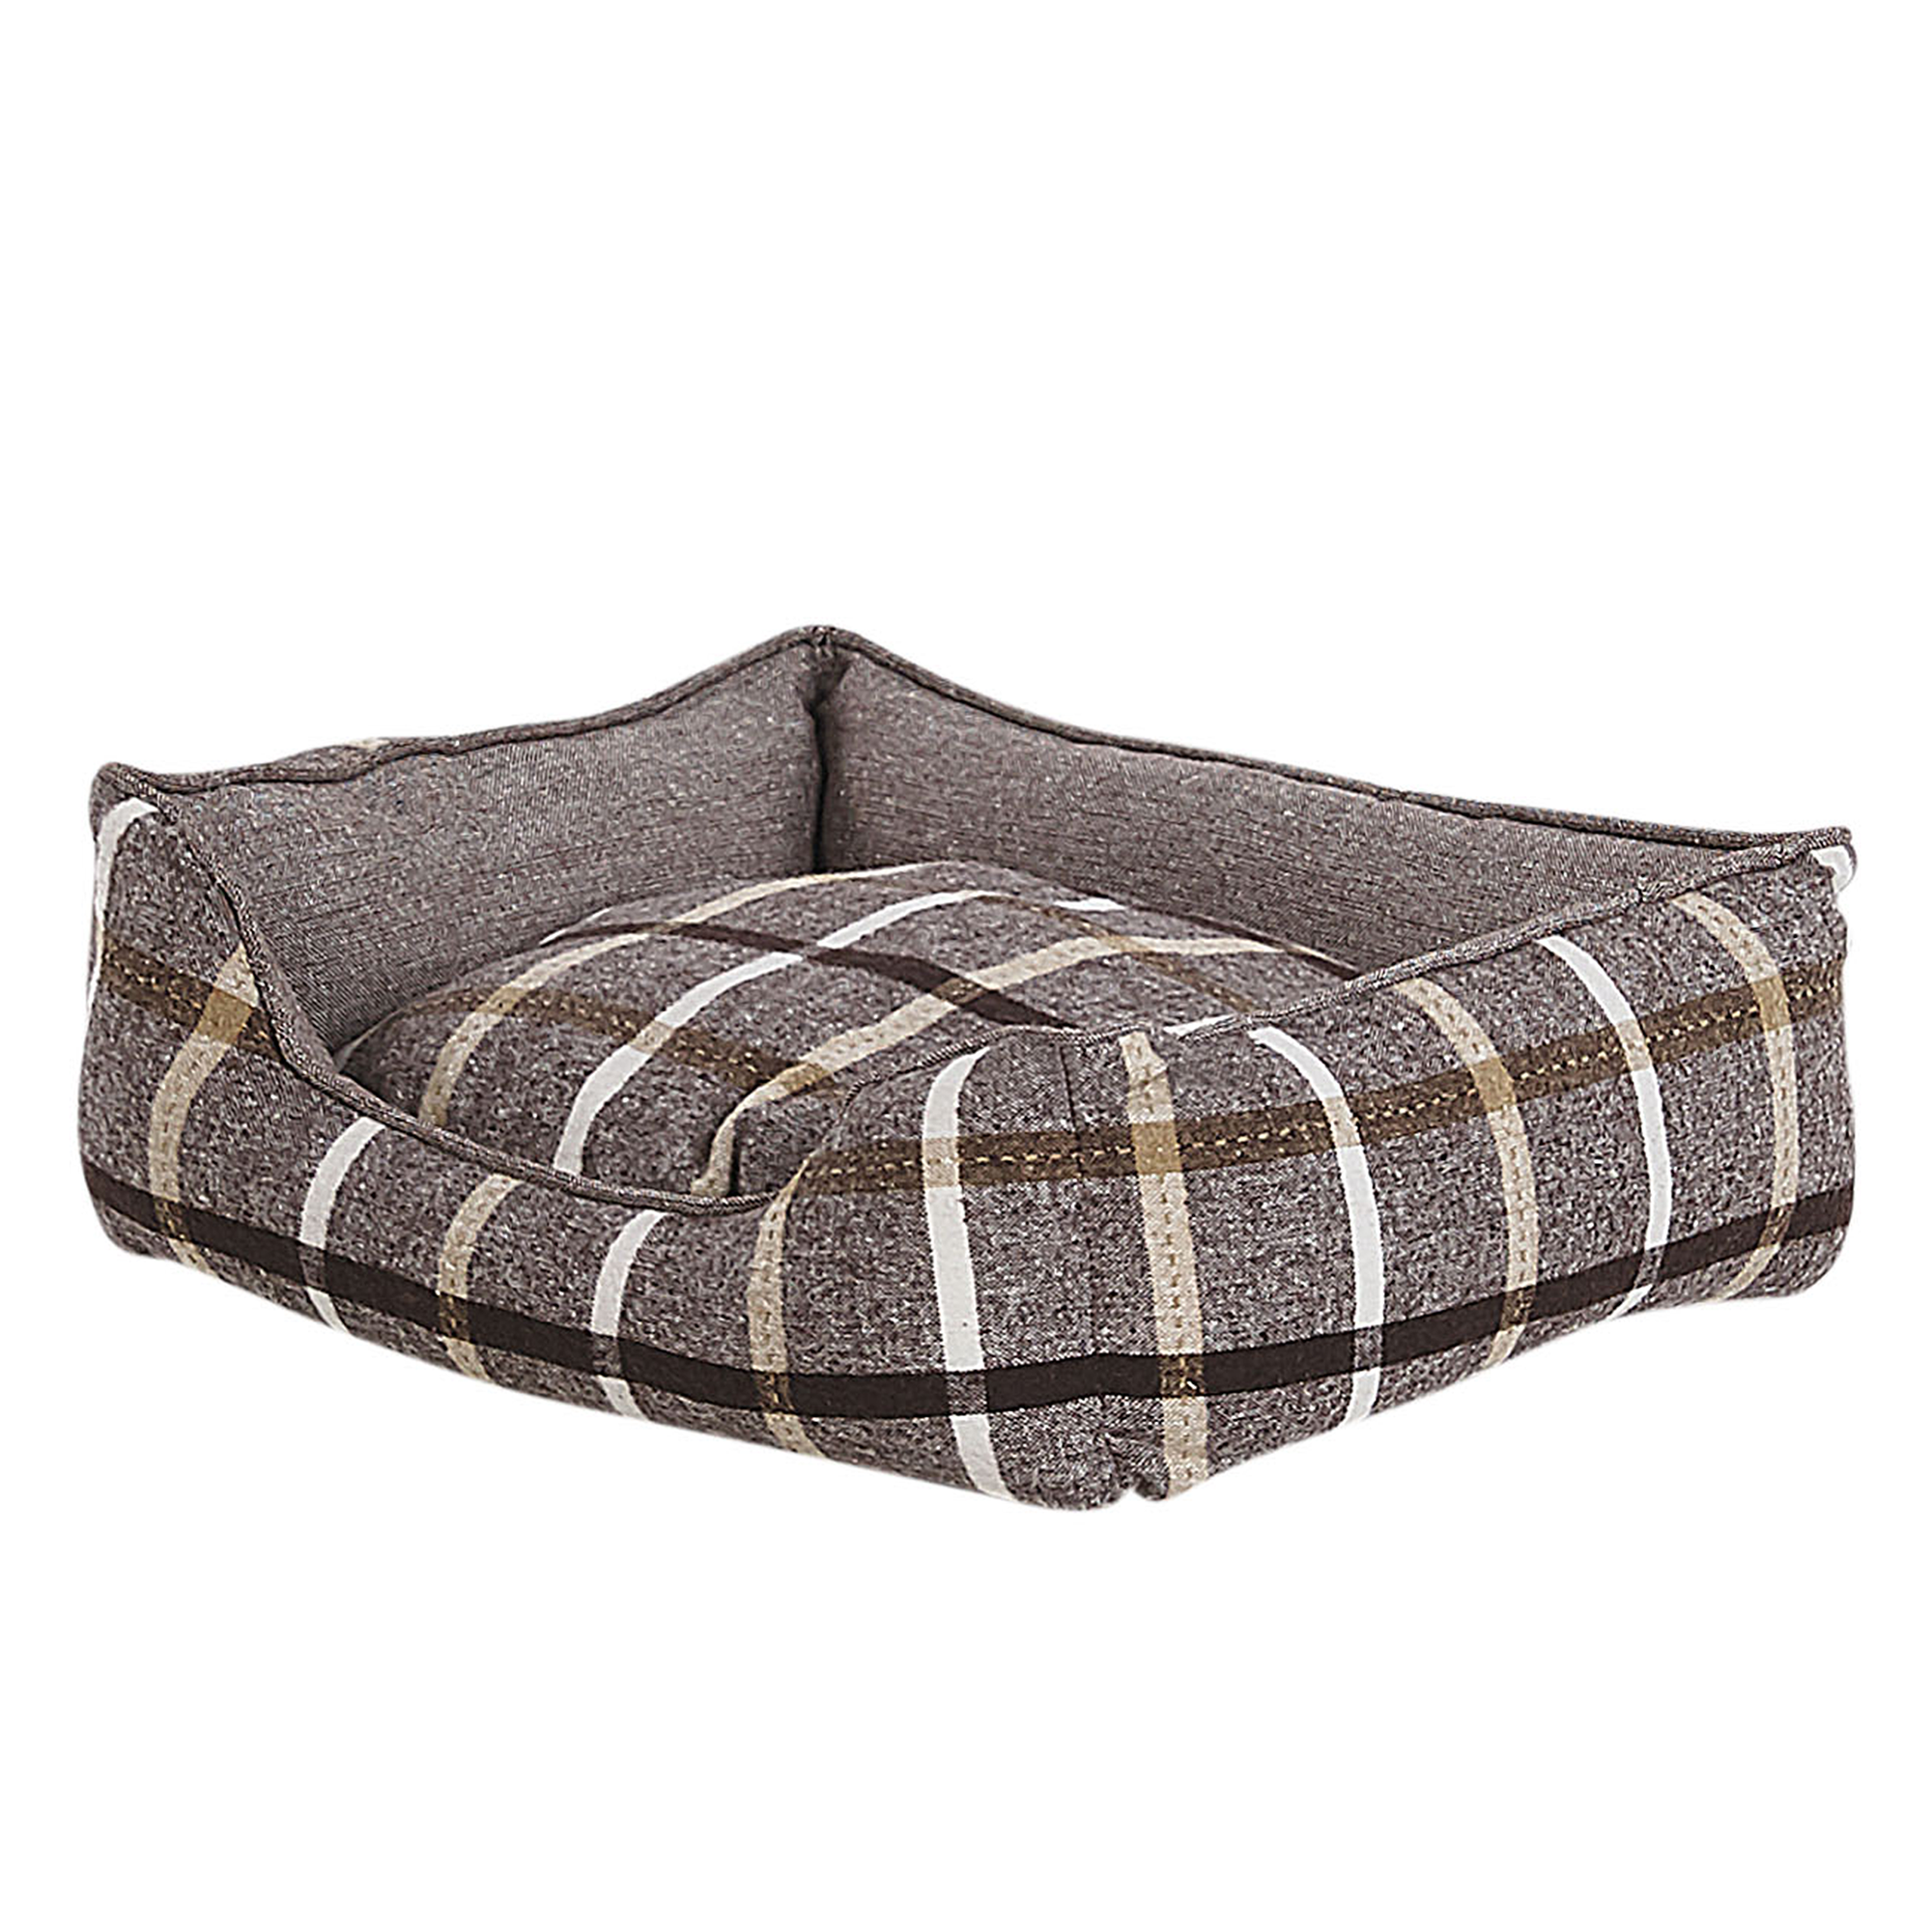 Beliani Pet Bed Dog Cat Grey Linen Square Chequered Pattern Material:Cotton Size:50x15x50